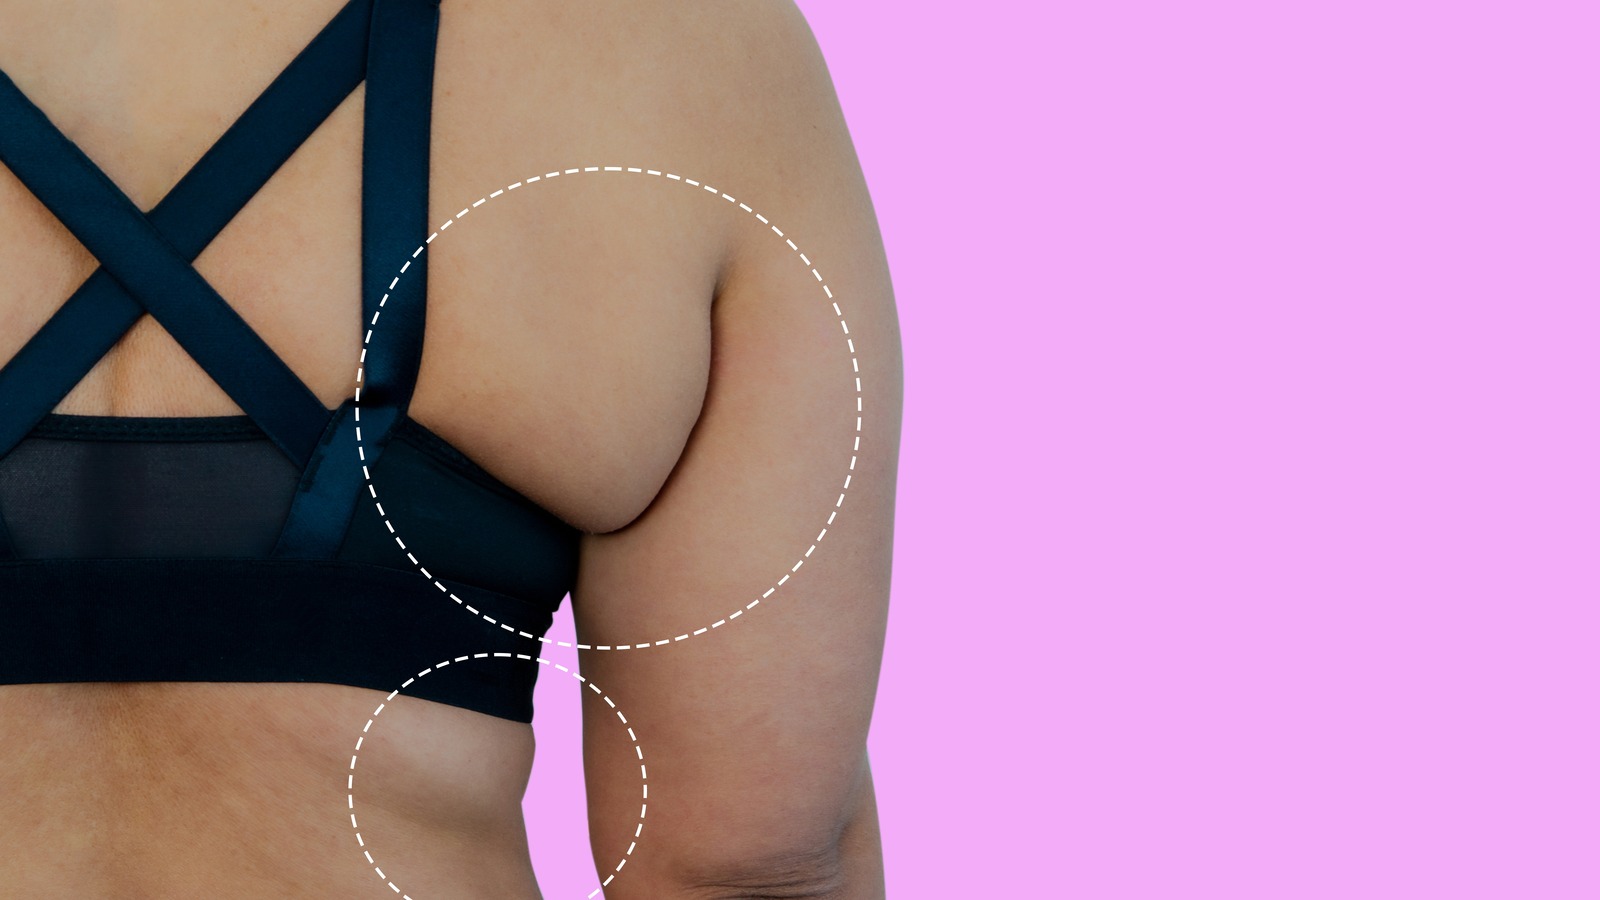 Everything you know about bras is wrong.